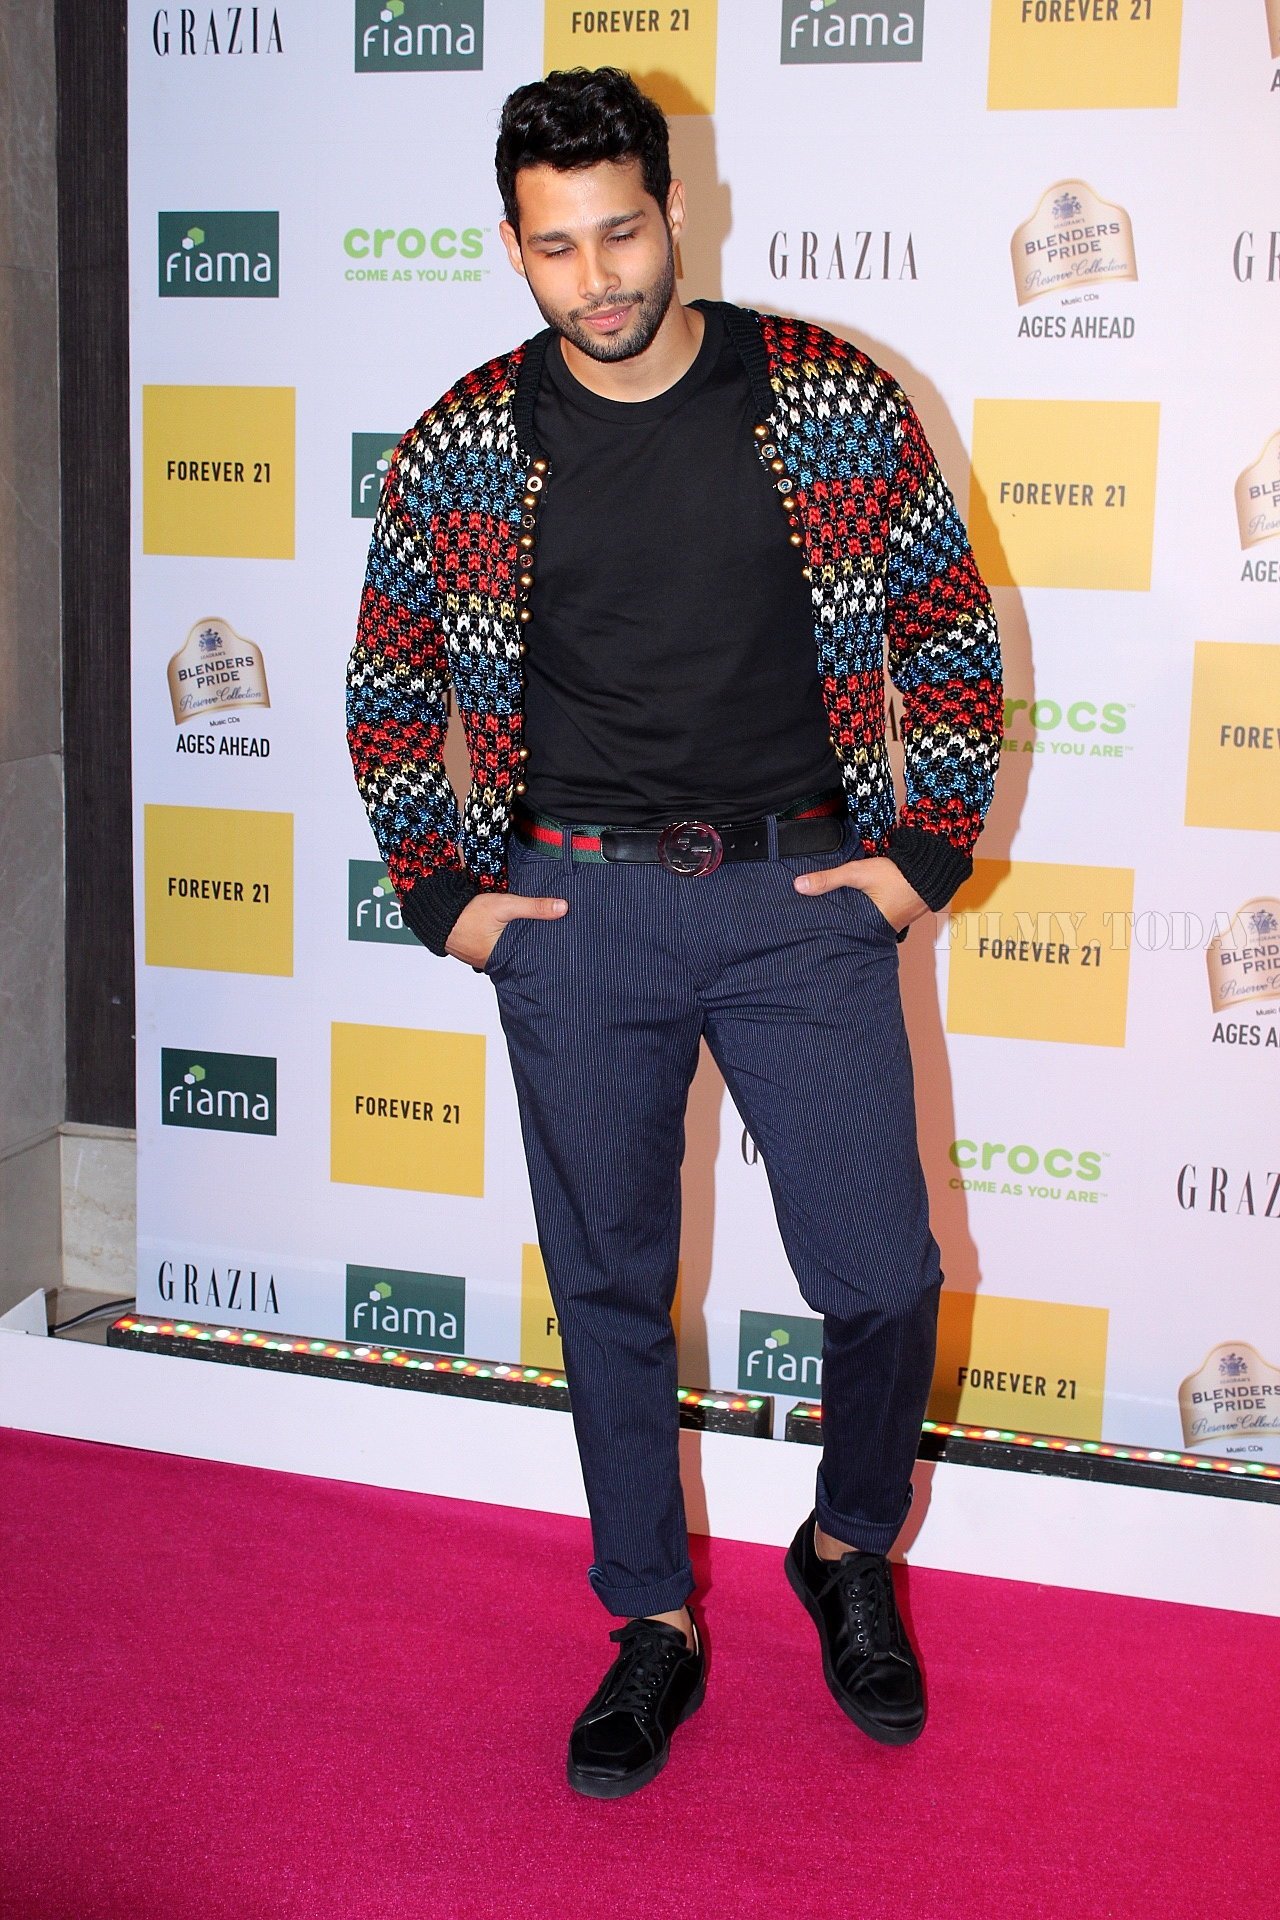 Siddhant Chaturvedi - Photos: Red Carpet Of 1st Edition Of Grazia Millennial Awards 2019 | Picture 1655396